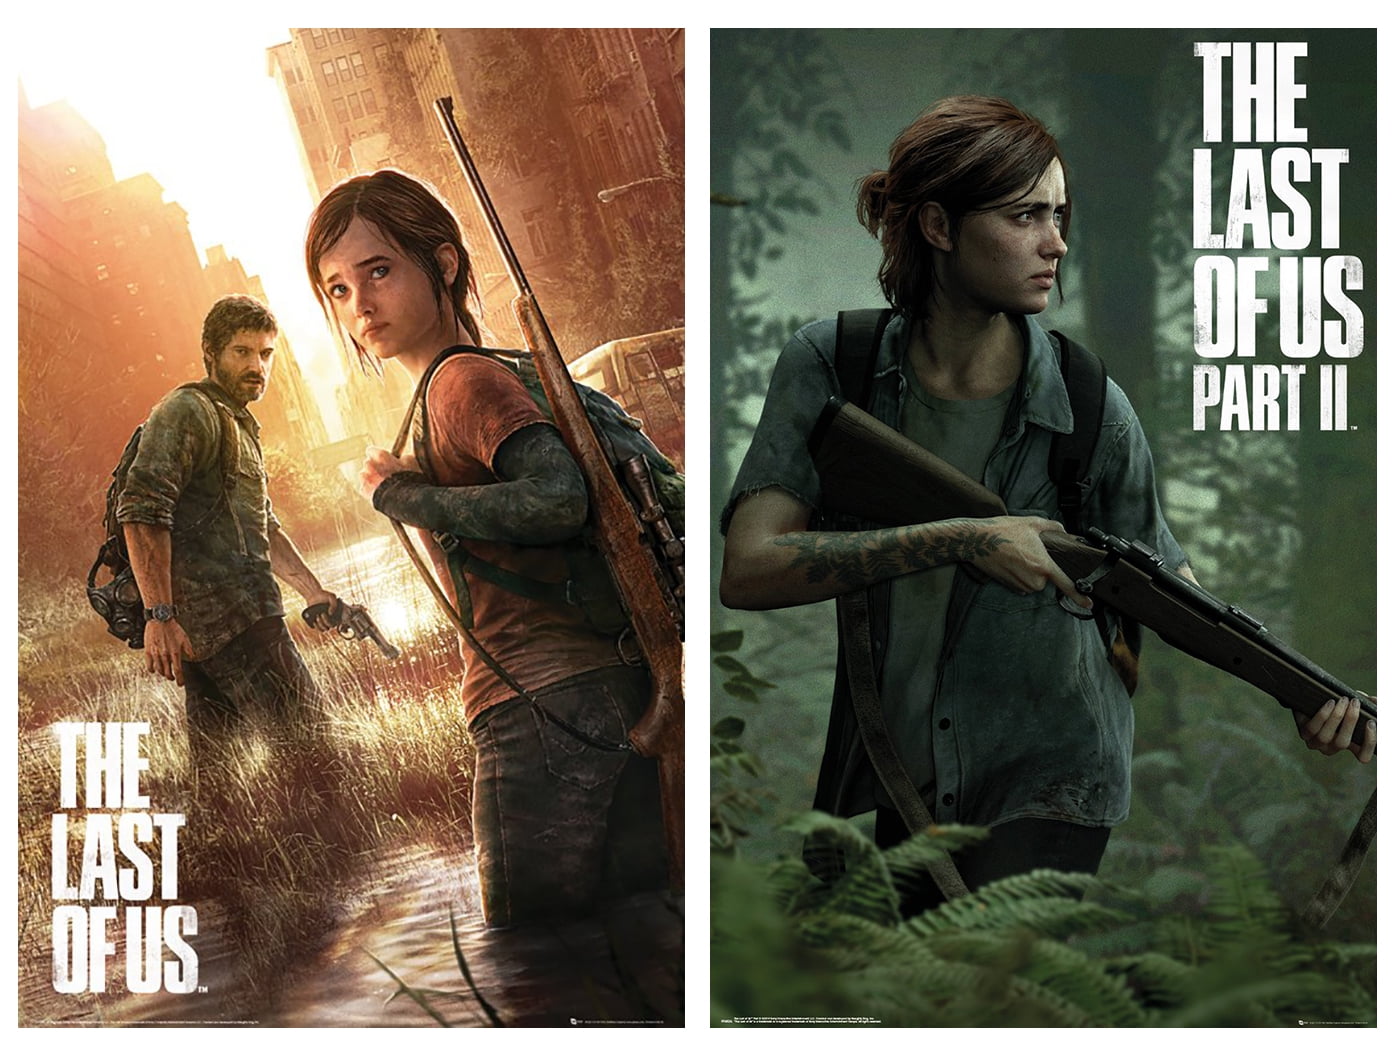 The Last Of Us Part I And Ii Gaming Poster Set Key Art Game Covers 